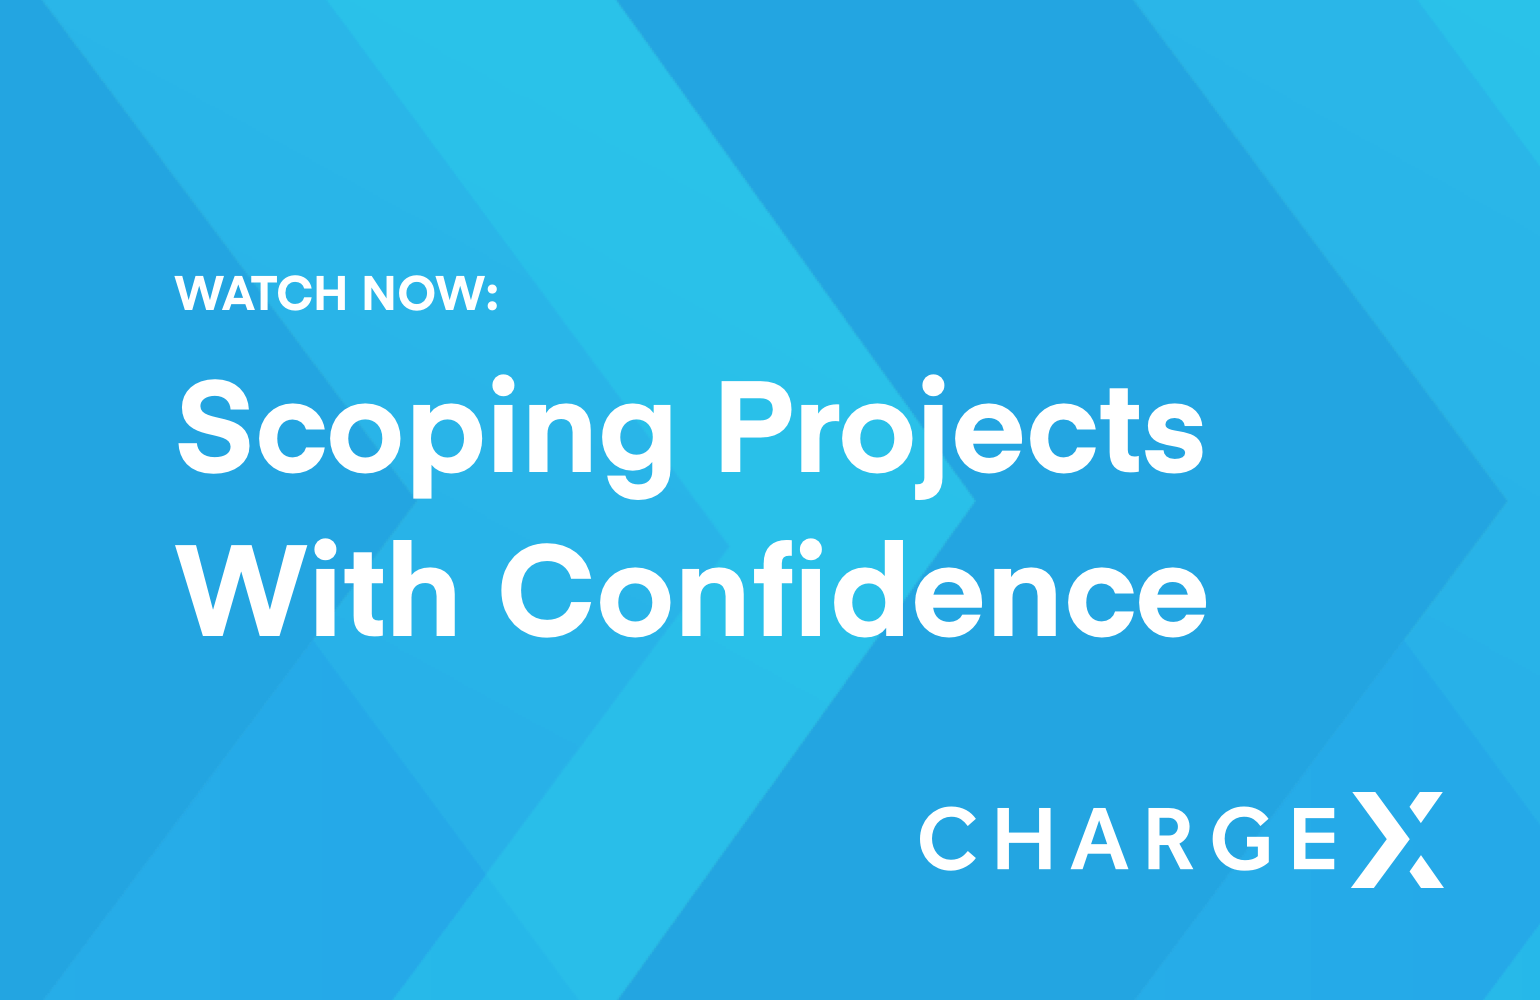 Scoping projects with confidence